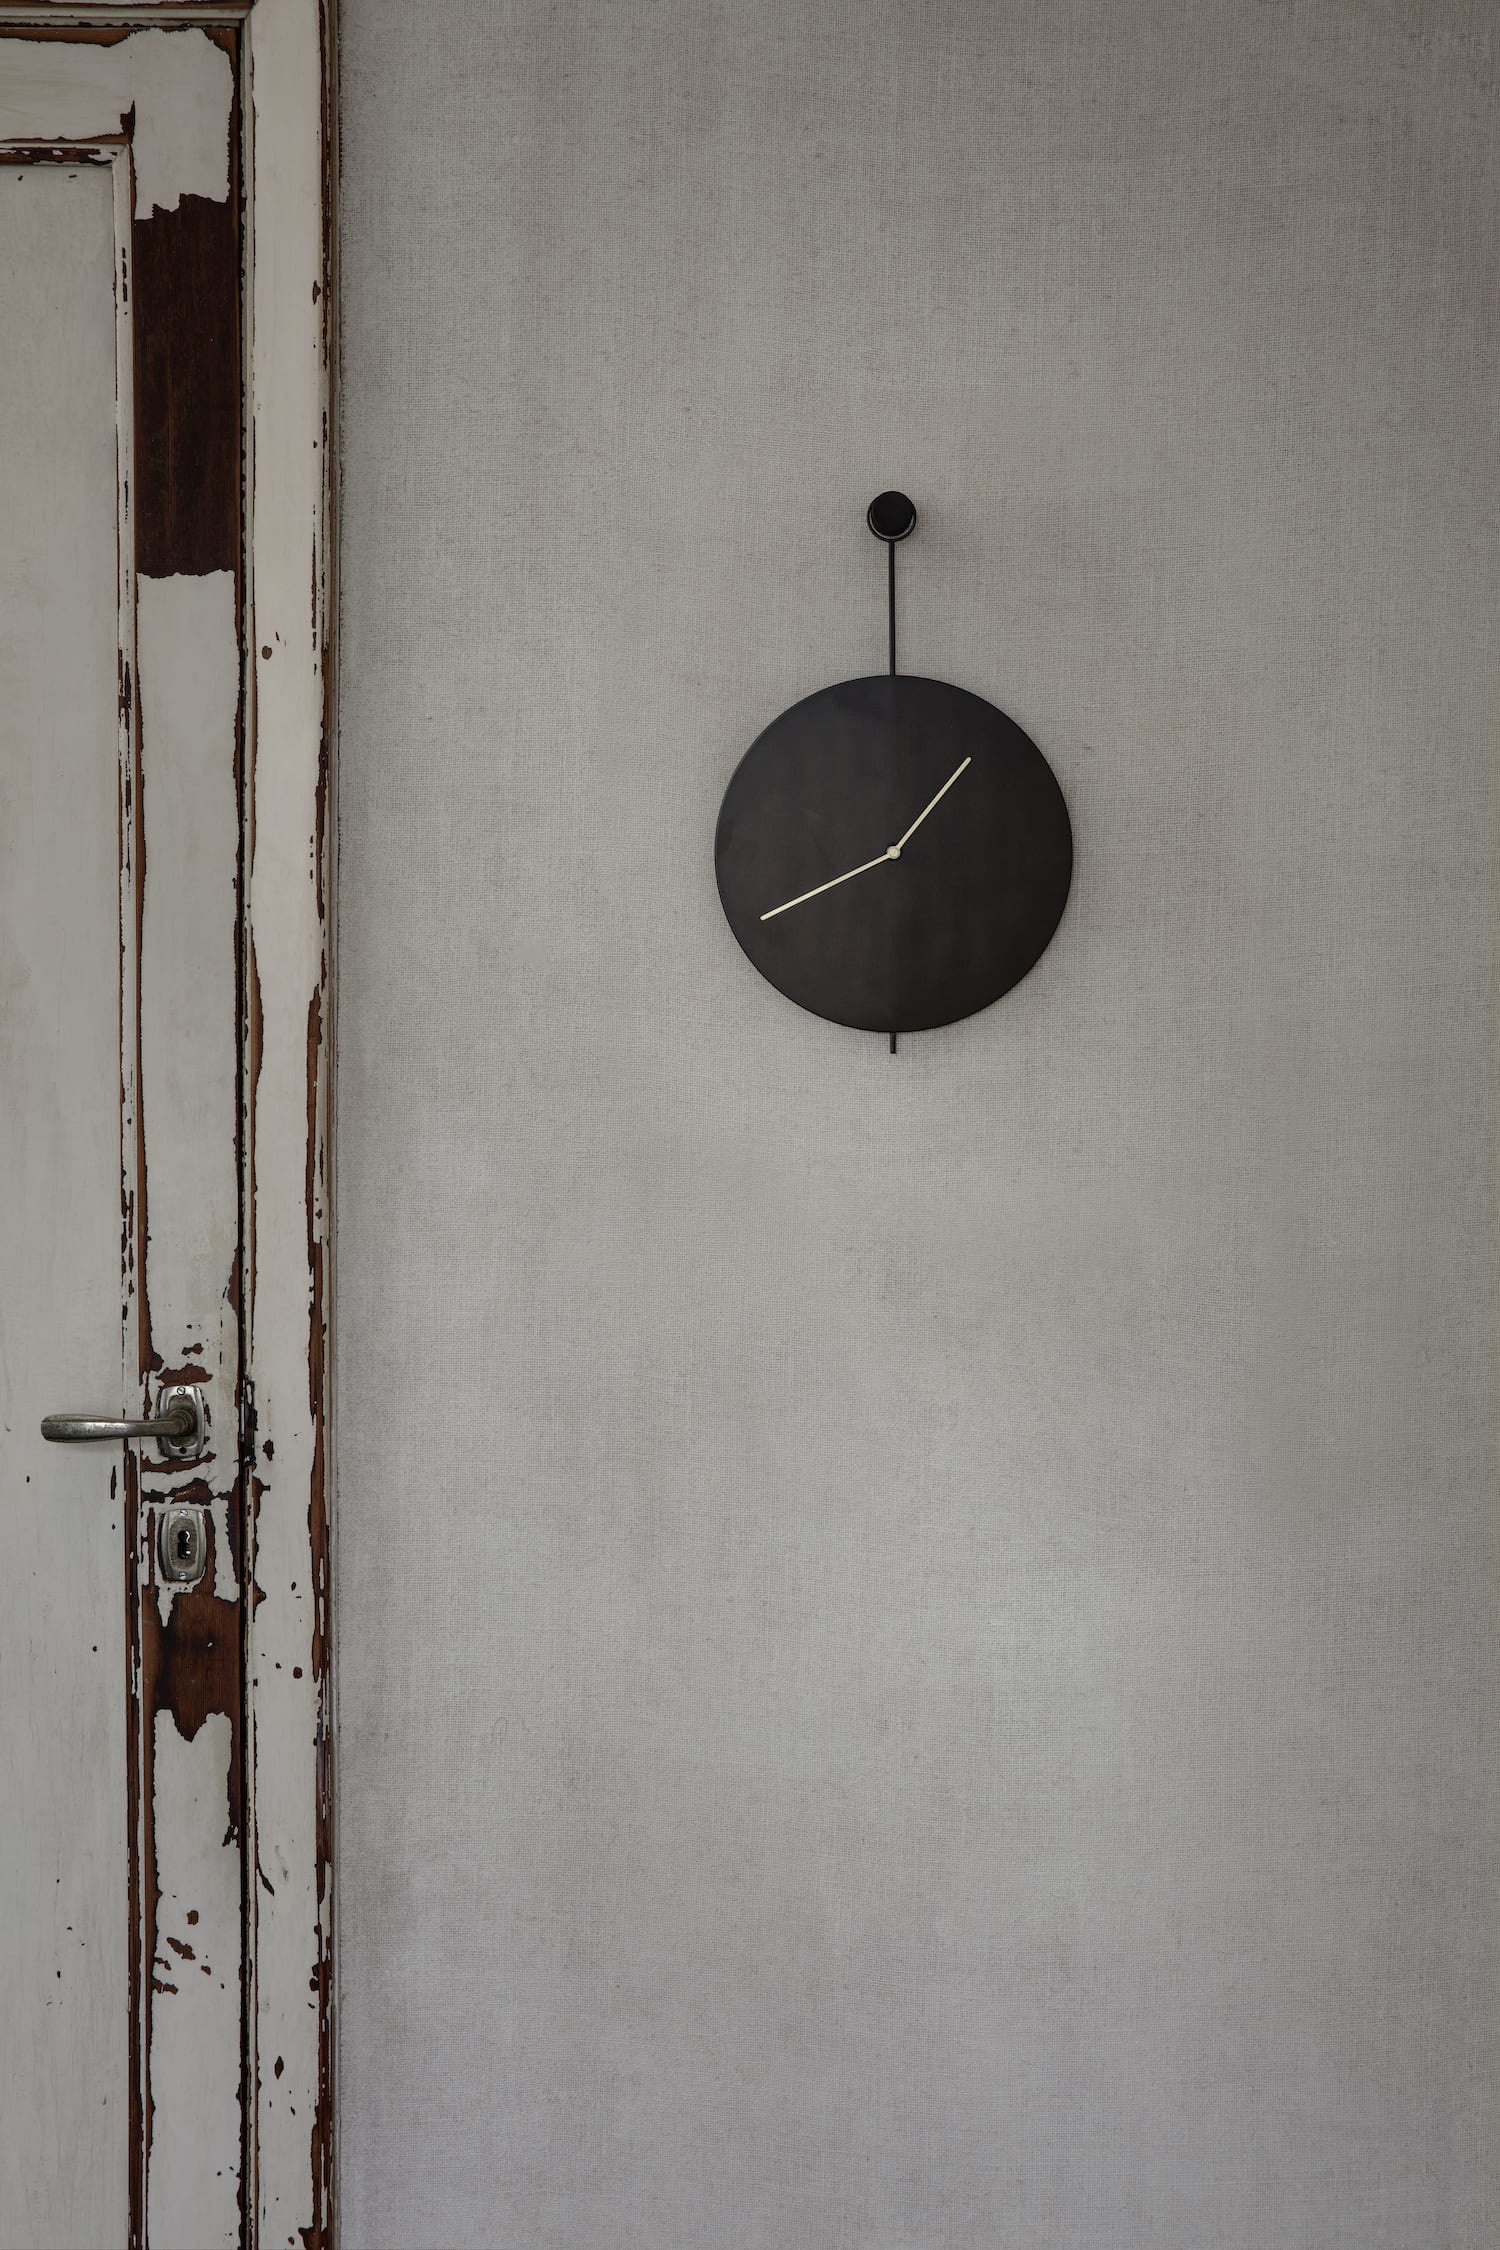 Trace Wall Clock. Minimalist, elegant wall clock with brass hands on a background of blackened steel, revealing only the constant, subtle movements of two hands reflecting the trace of time.